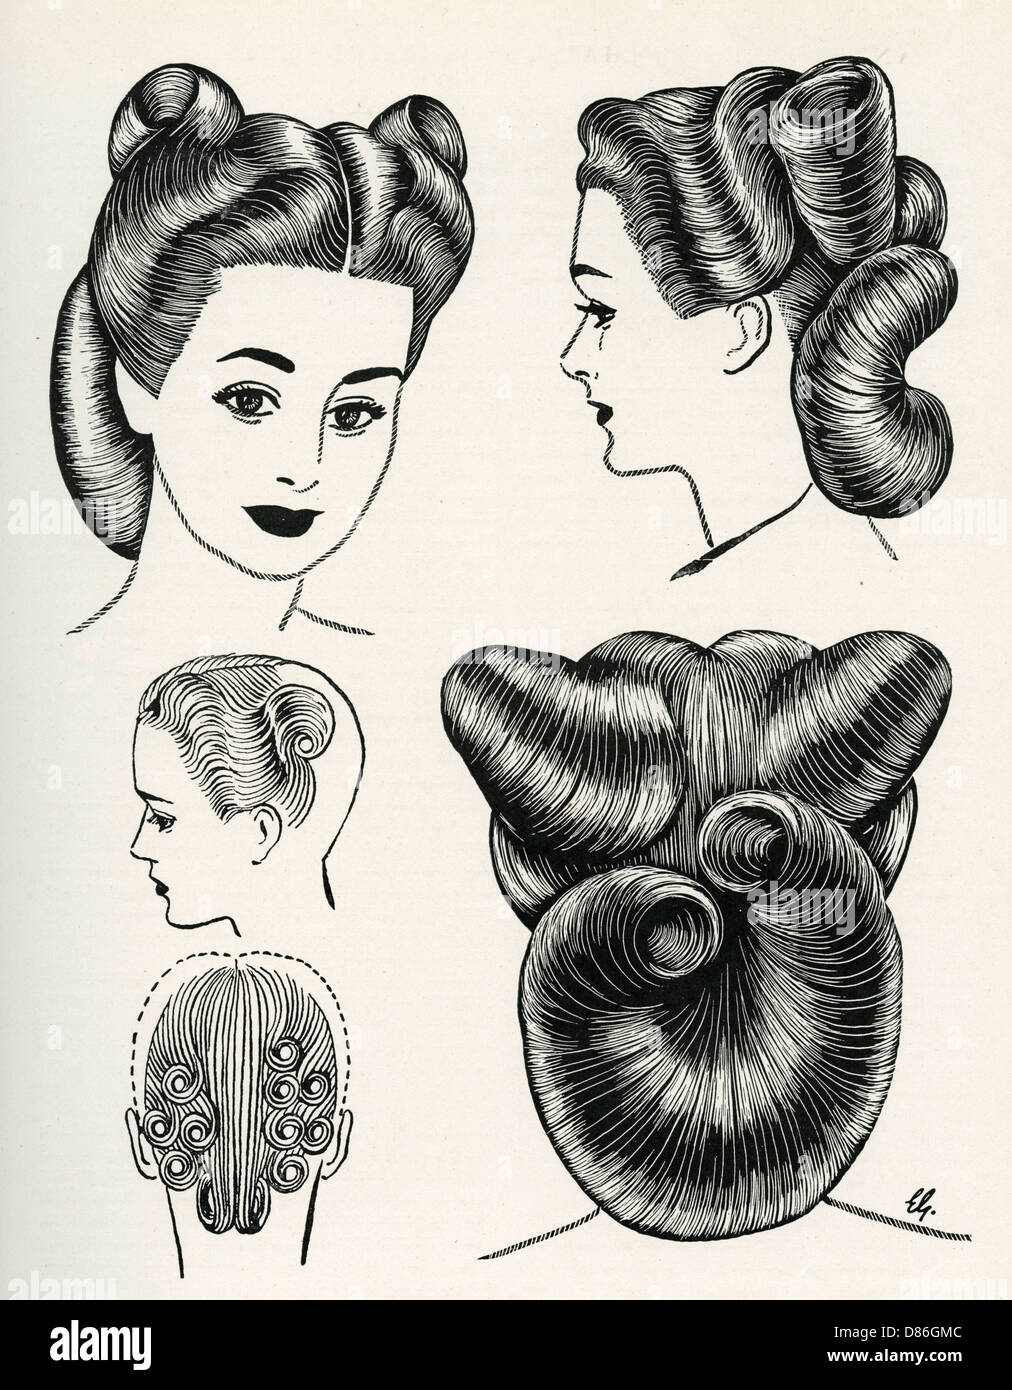 Coiffure circulaire 1940s Banque D'Images